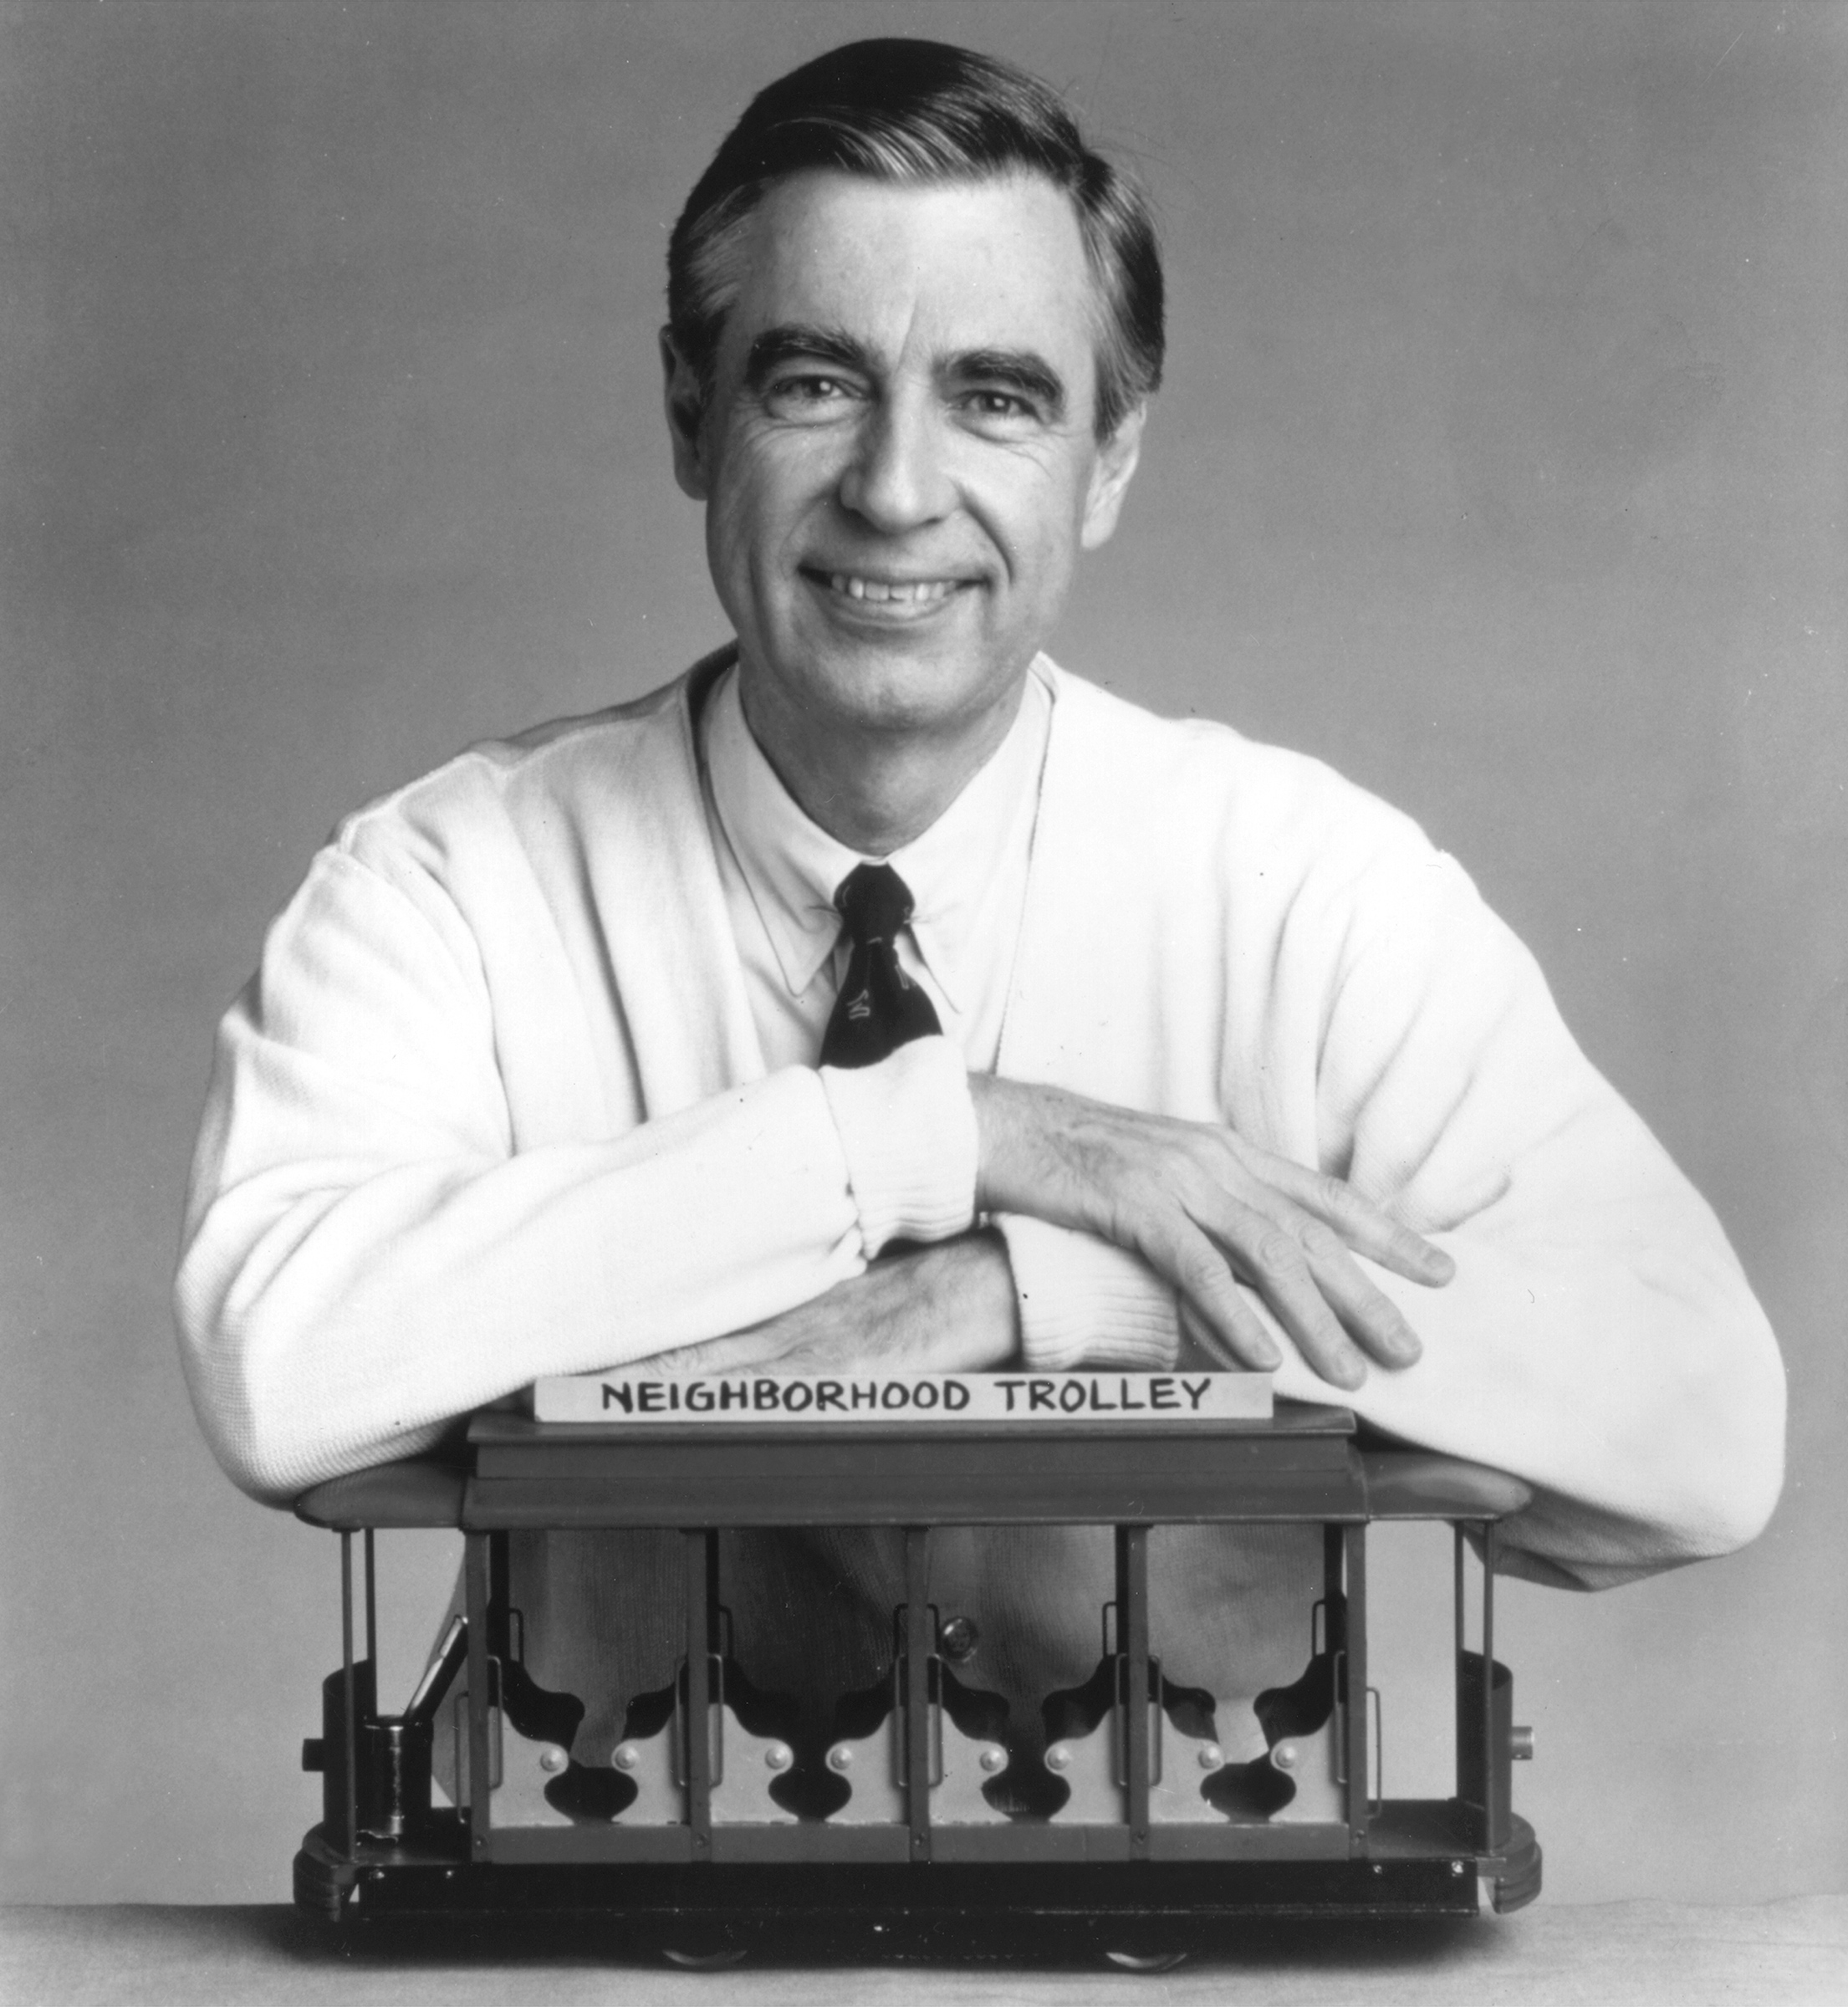 Fred Rogers, the host of the children's television series, "Mr. Rogers' Neighborhood," rests his arms on a small trolley in this promotional portrait from the 1980's.